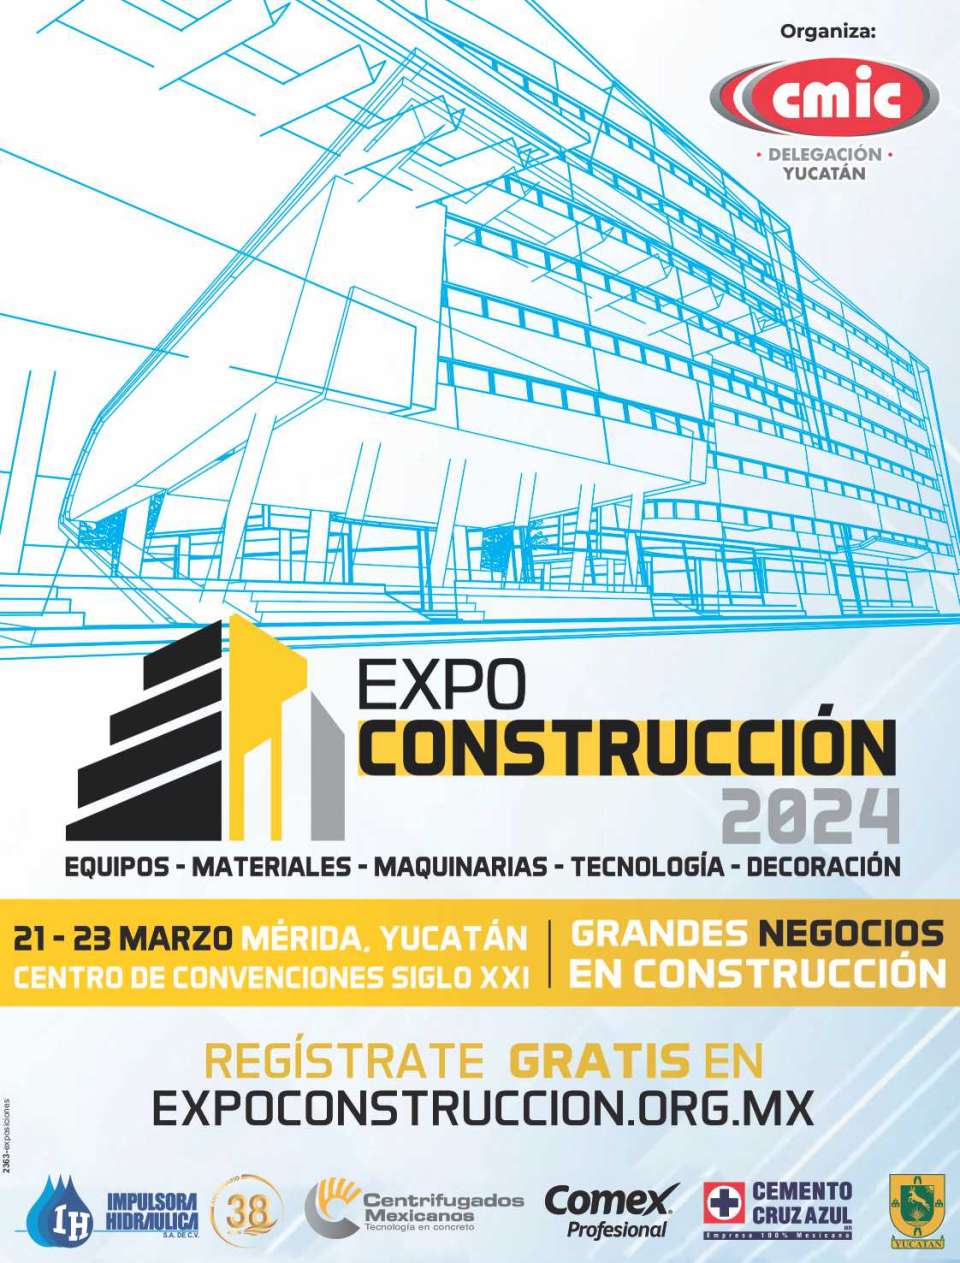 Yucatan construction trade show at Merida, March 21 to March 23, 2024.